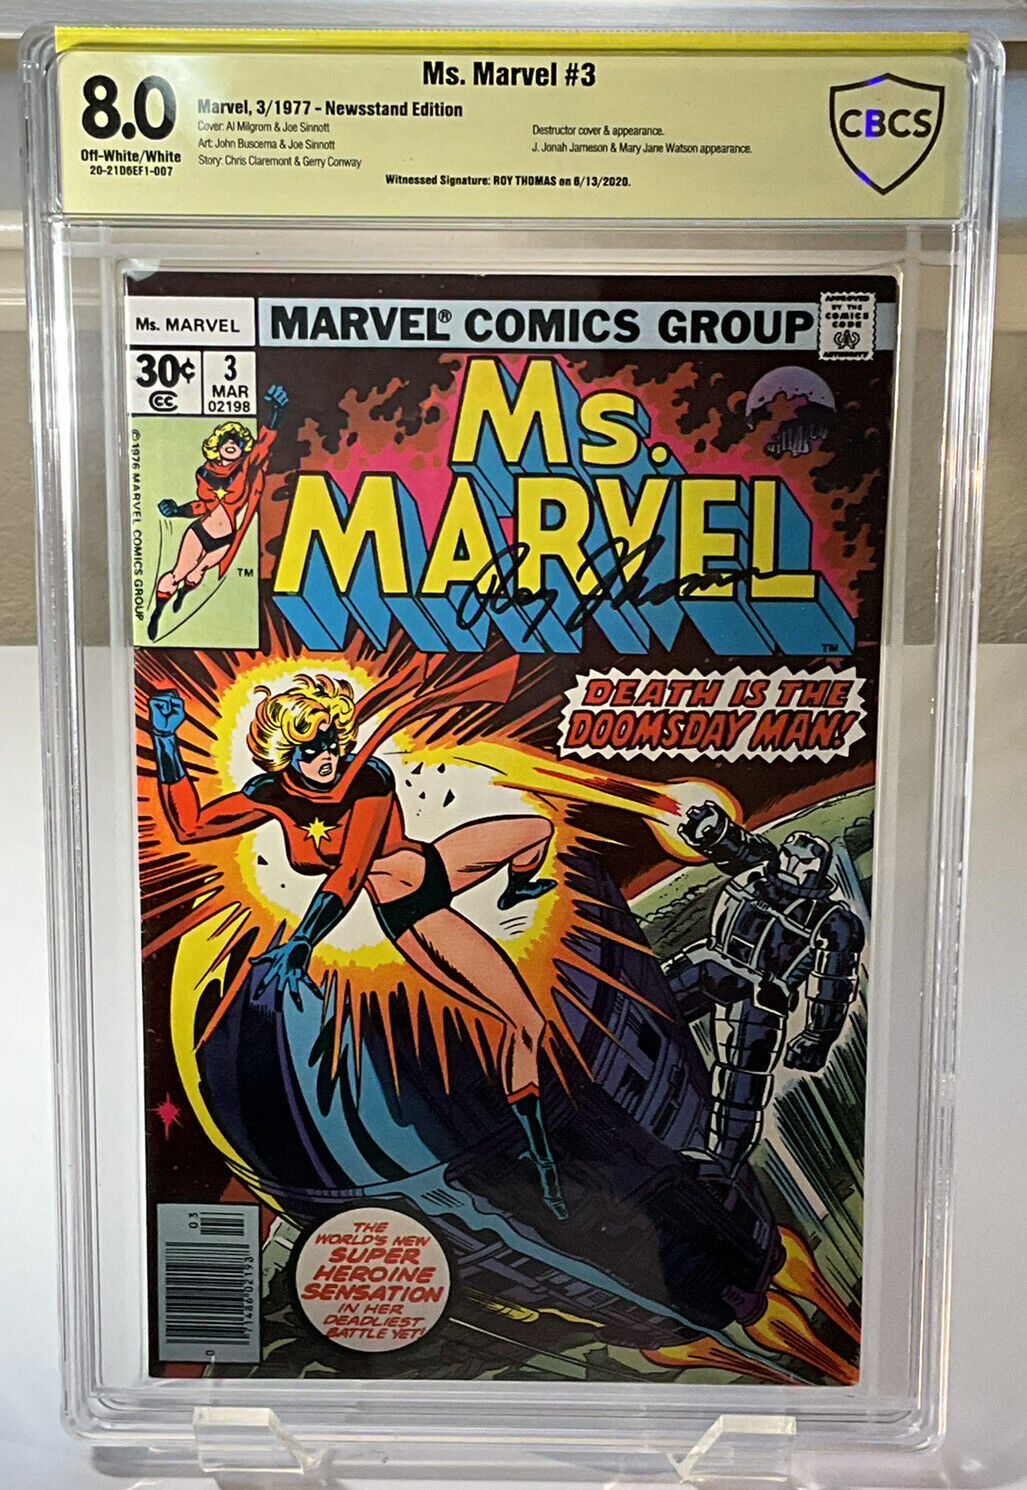 Ms. Marvel # 3 CBCS (8.0) MCU 1977 Newsstand edition signed  by Roy Thomas